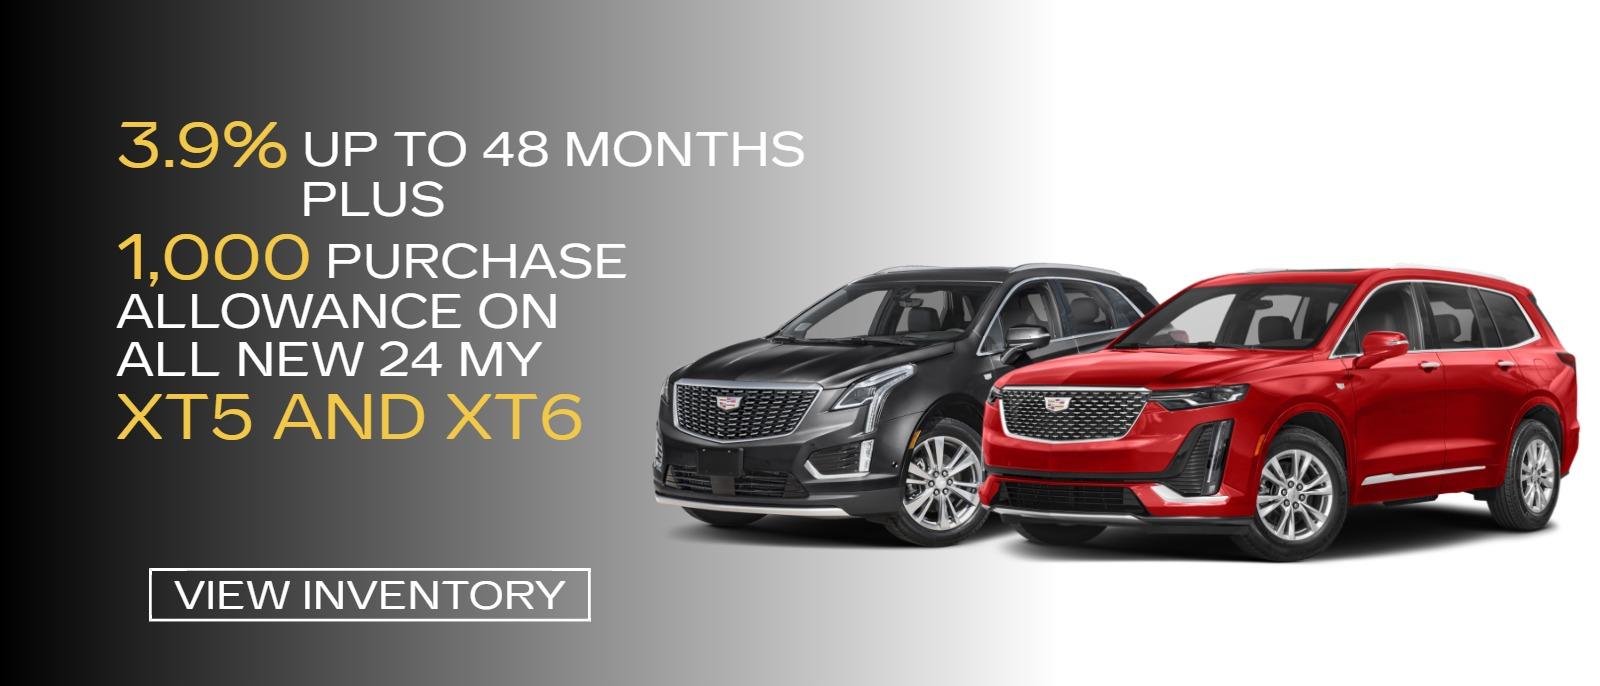 3.9% UP TO 48 MONTHS PLUS 1000 PURCHASE ALLOWANCE ON ALL NEW 24 MY XT5 AND XT6.